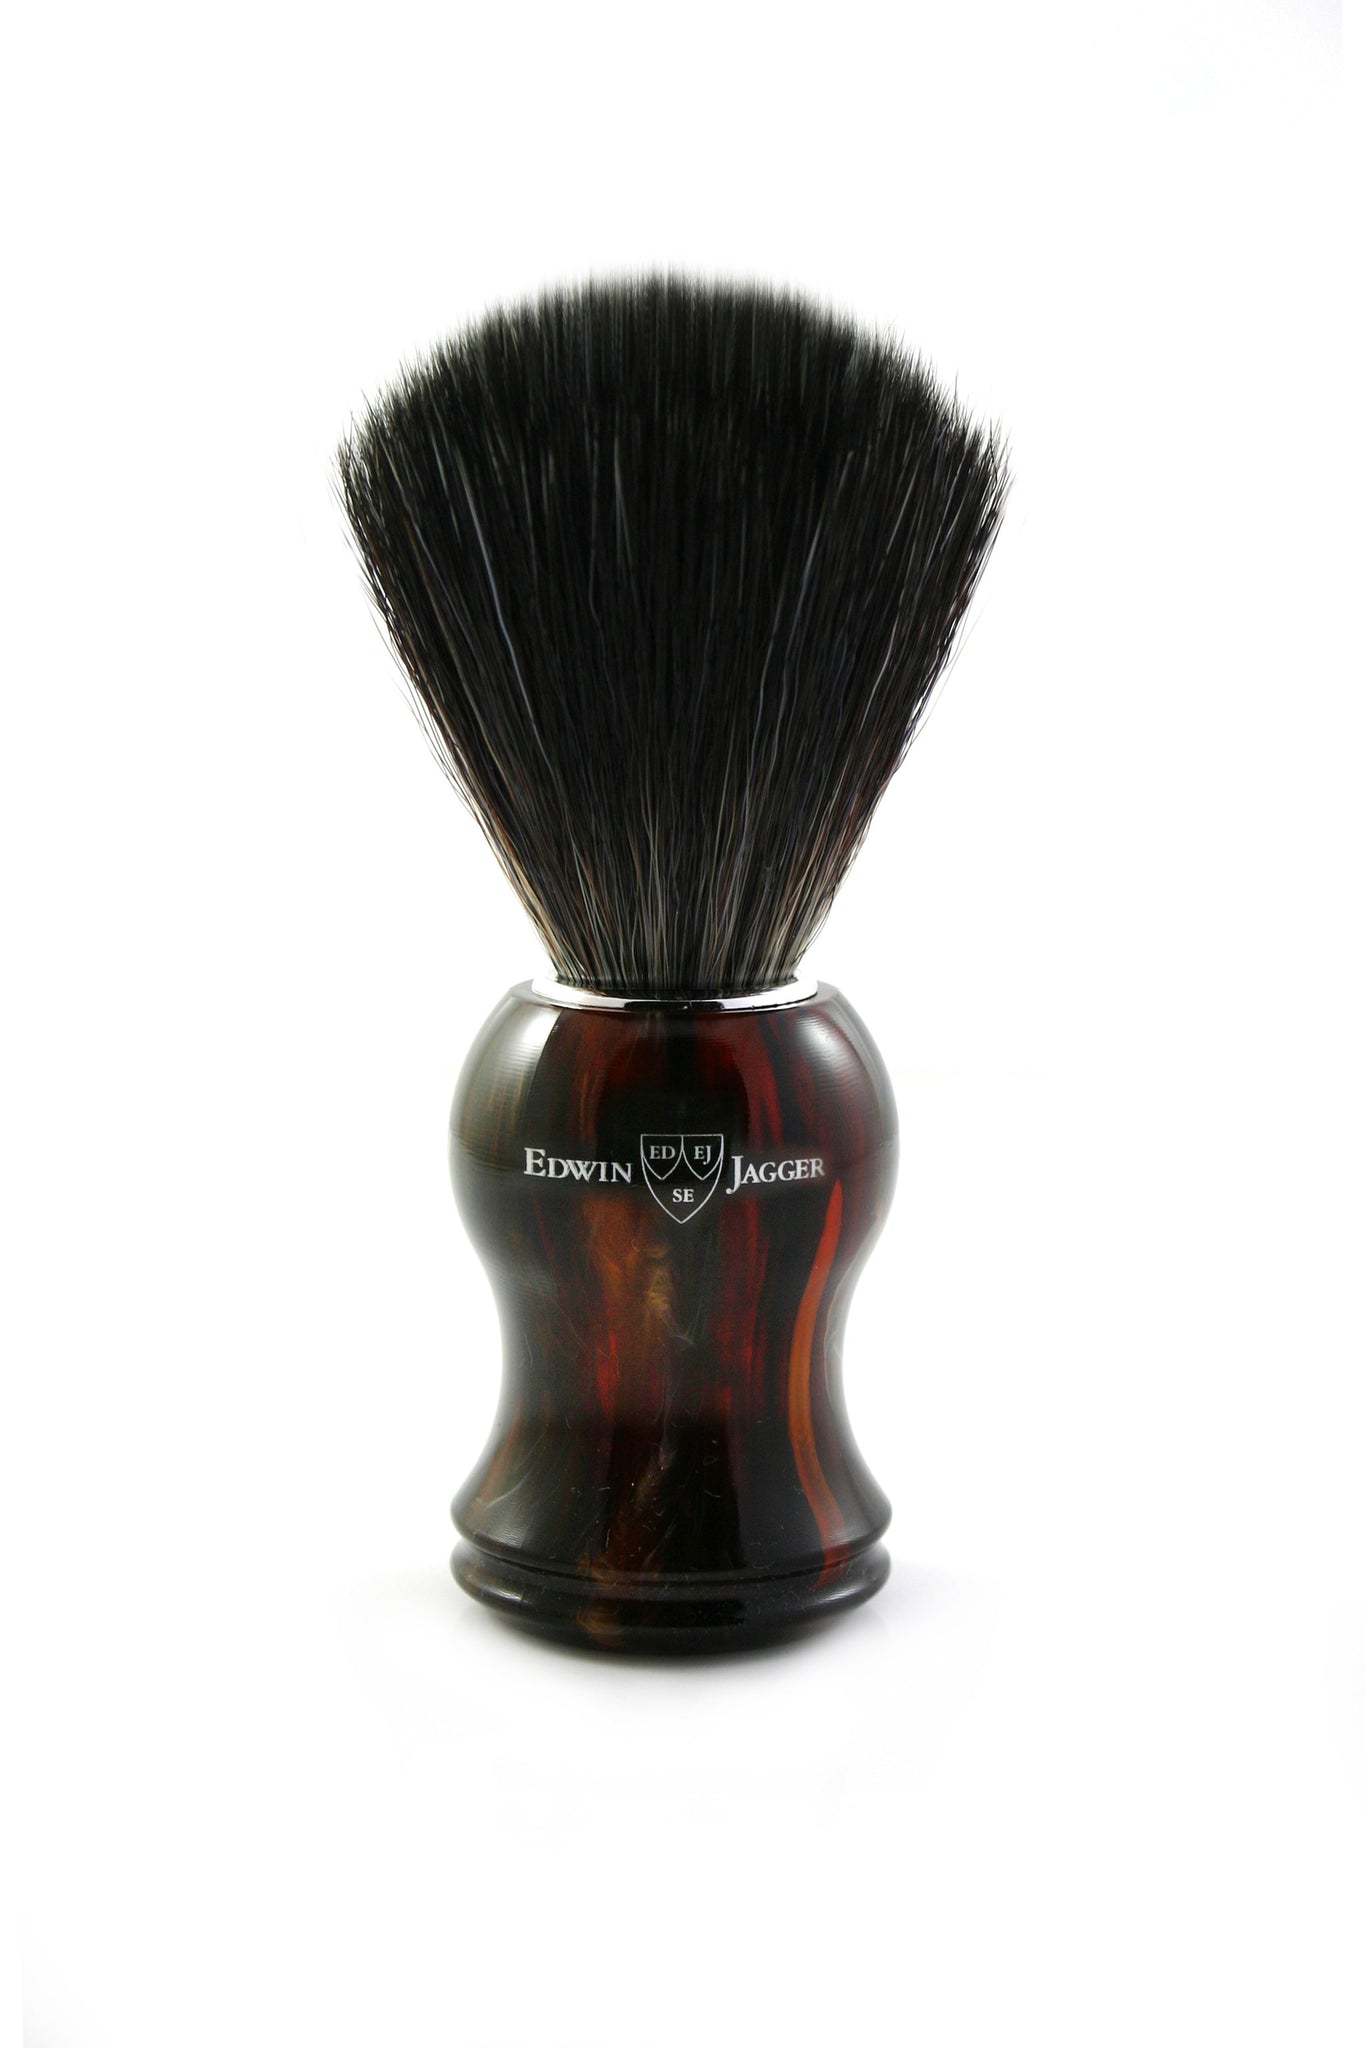 EDWIN JAGGER SHAVE BRUSH BLACK SYNTHETIC WITH TORTOISE HANDLE 21P33